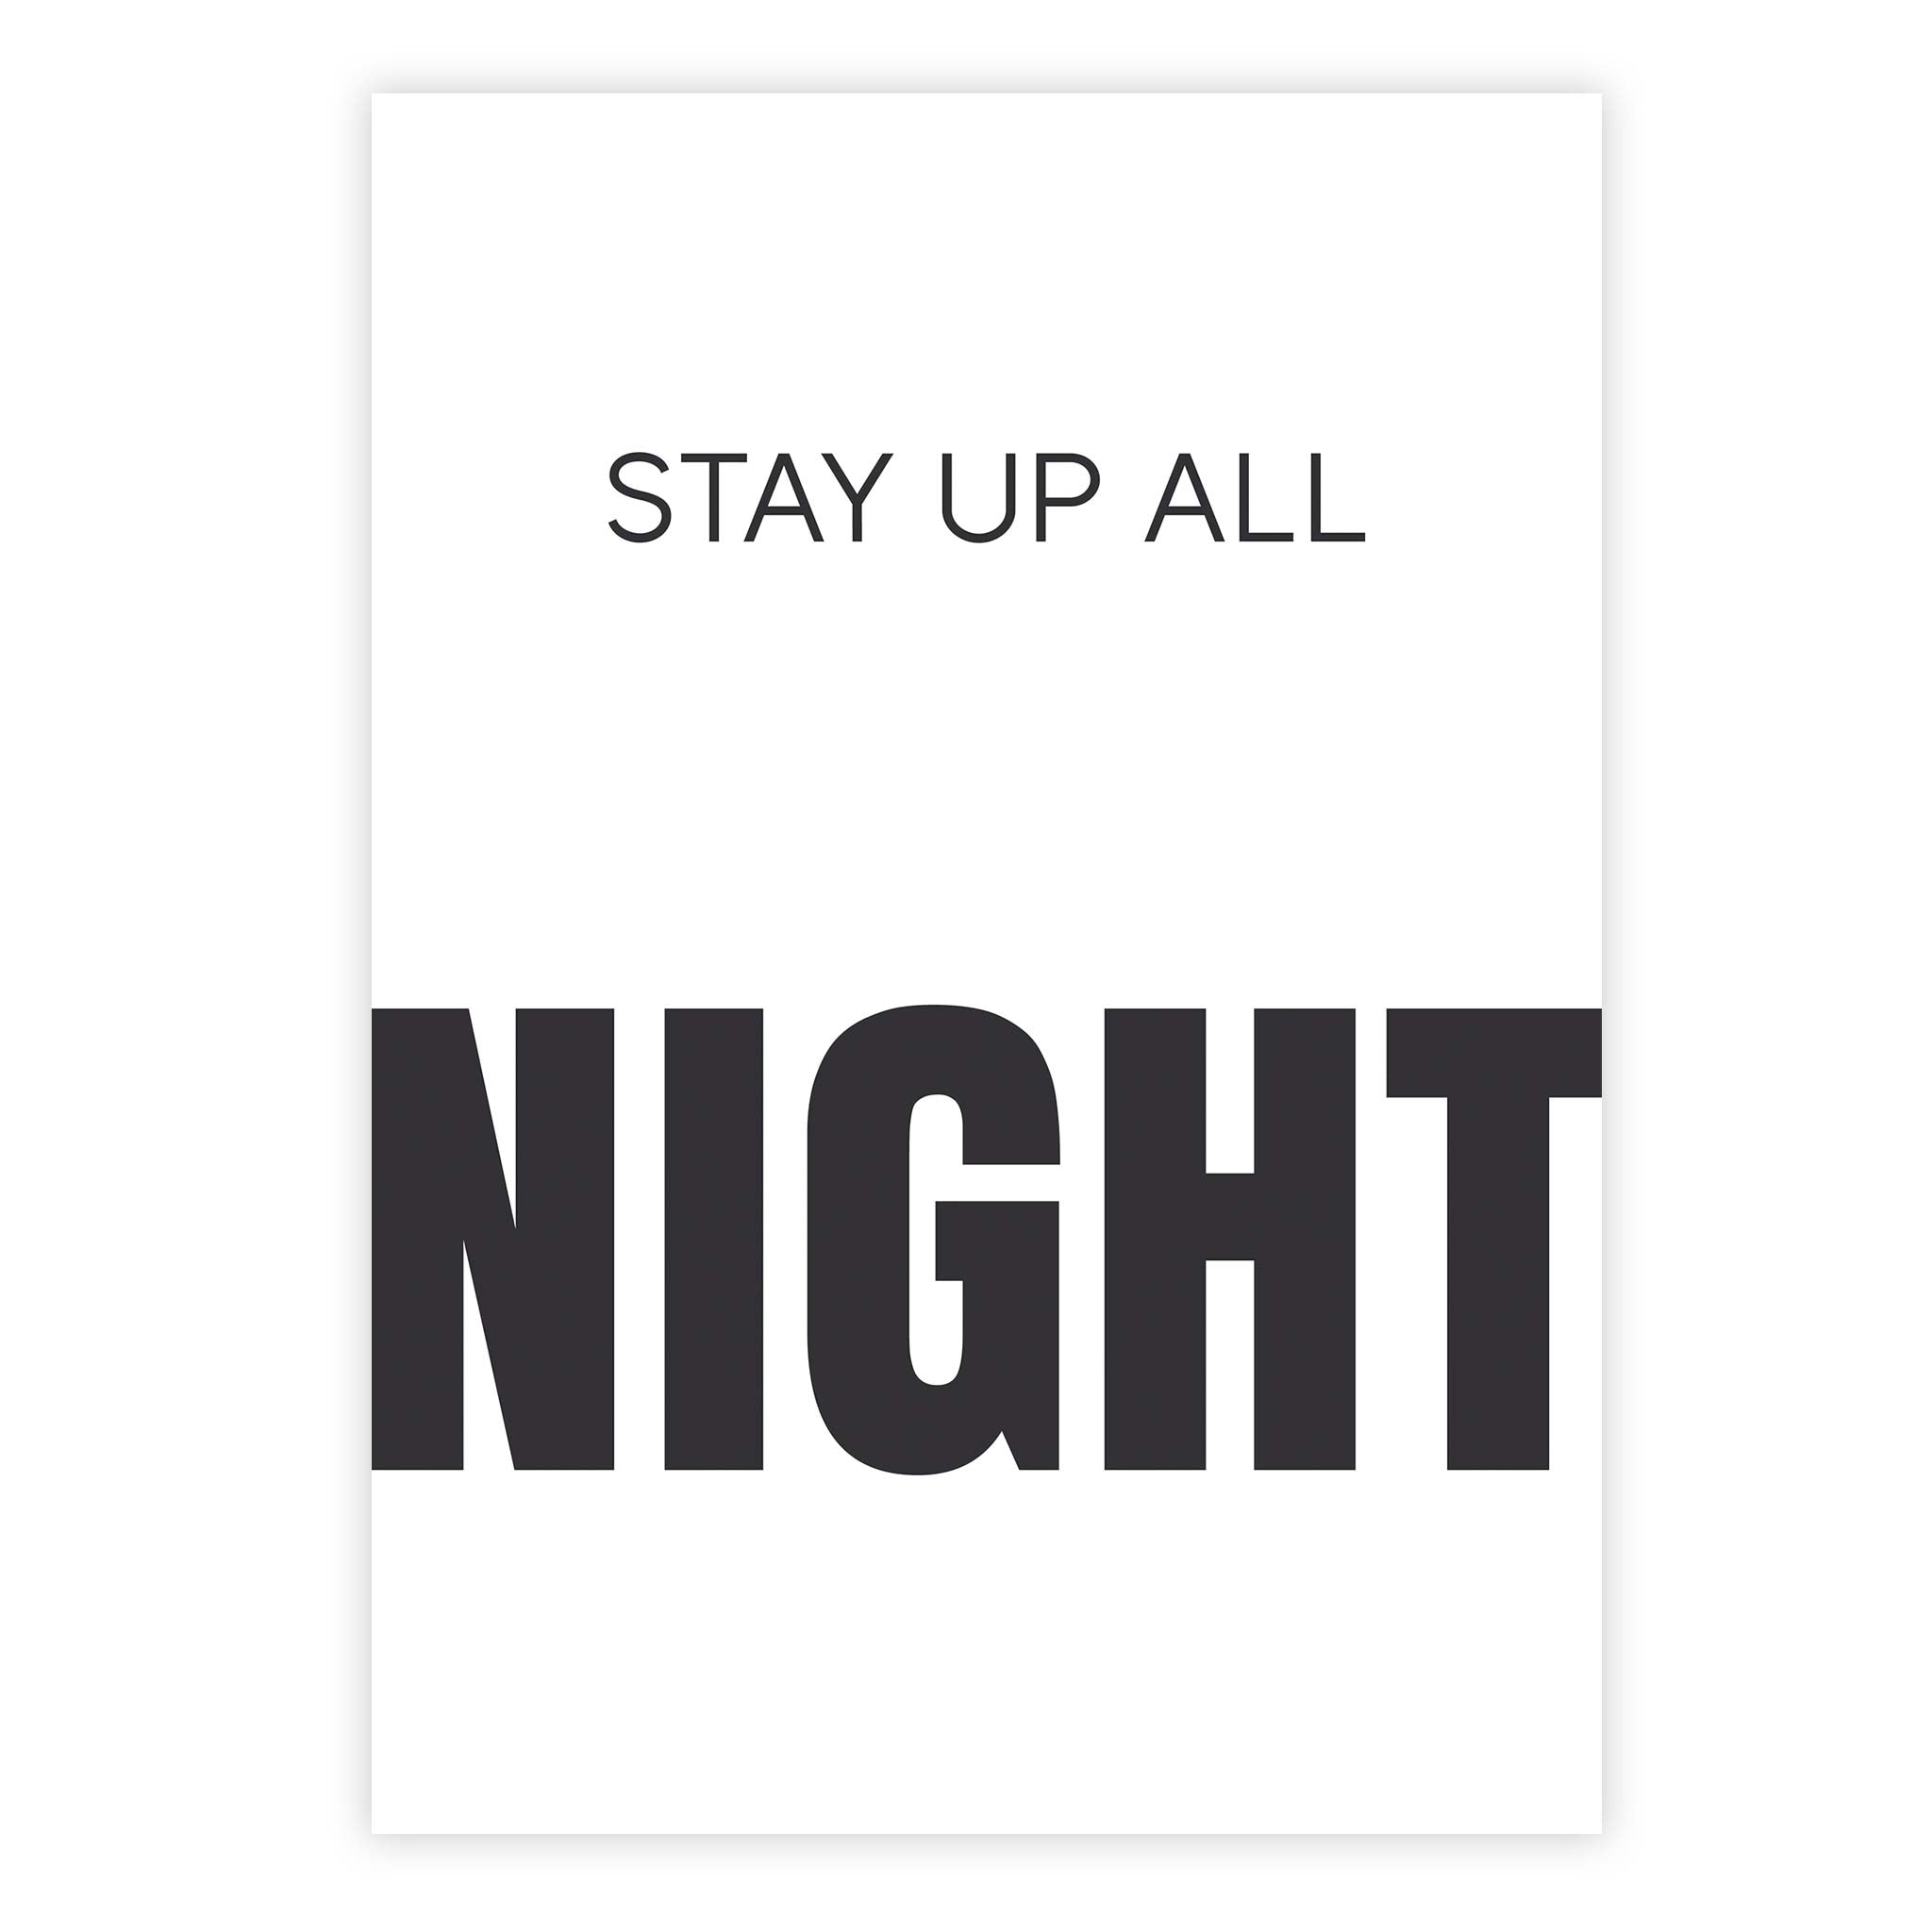 Stay up all night